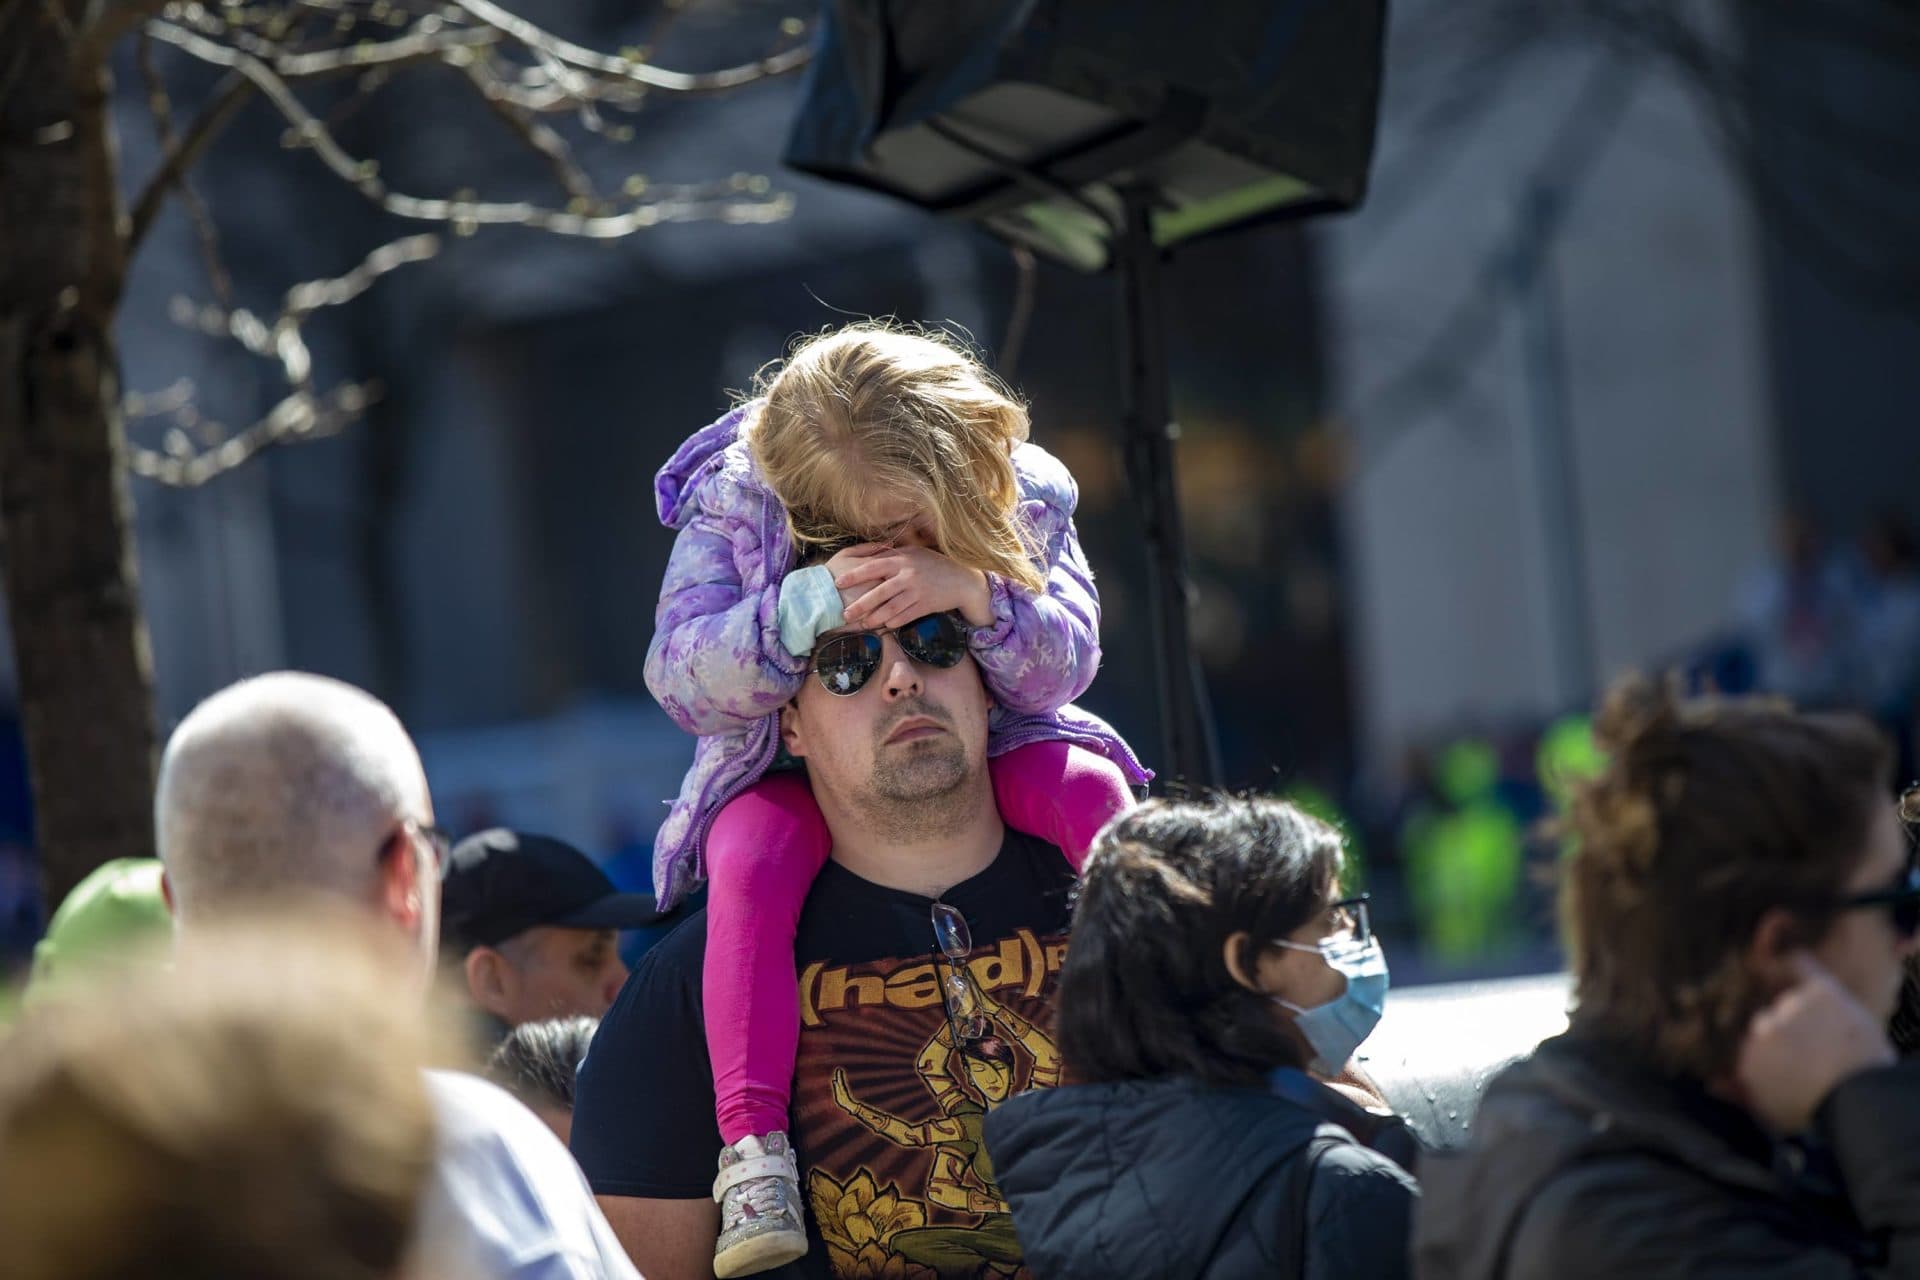 Five-year-old Jane Dawson waits for the wheelchair racers to finish on the shoulders of her stepfather Jordan Duguay by the finish line on Boylston Street. (Jesse Costa/WBUR)